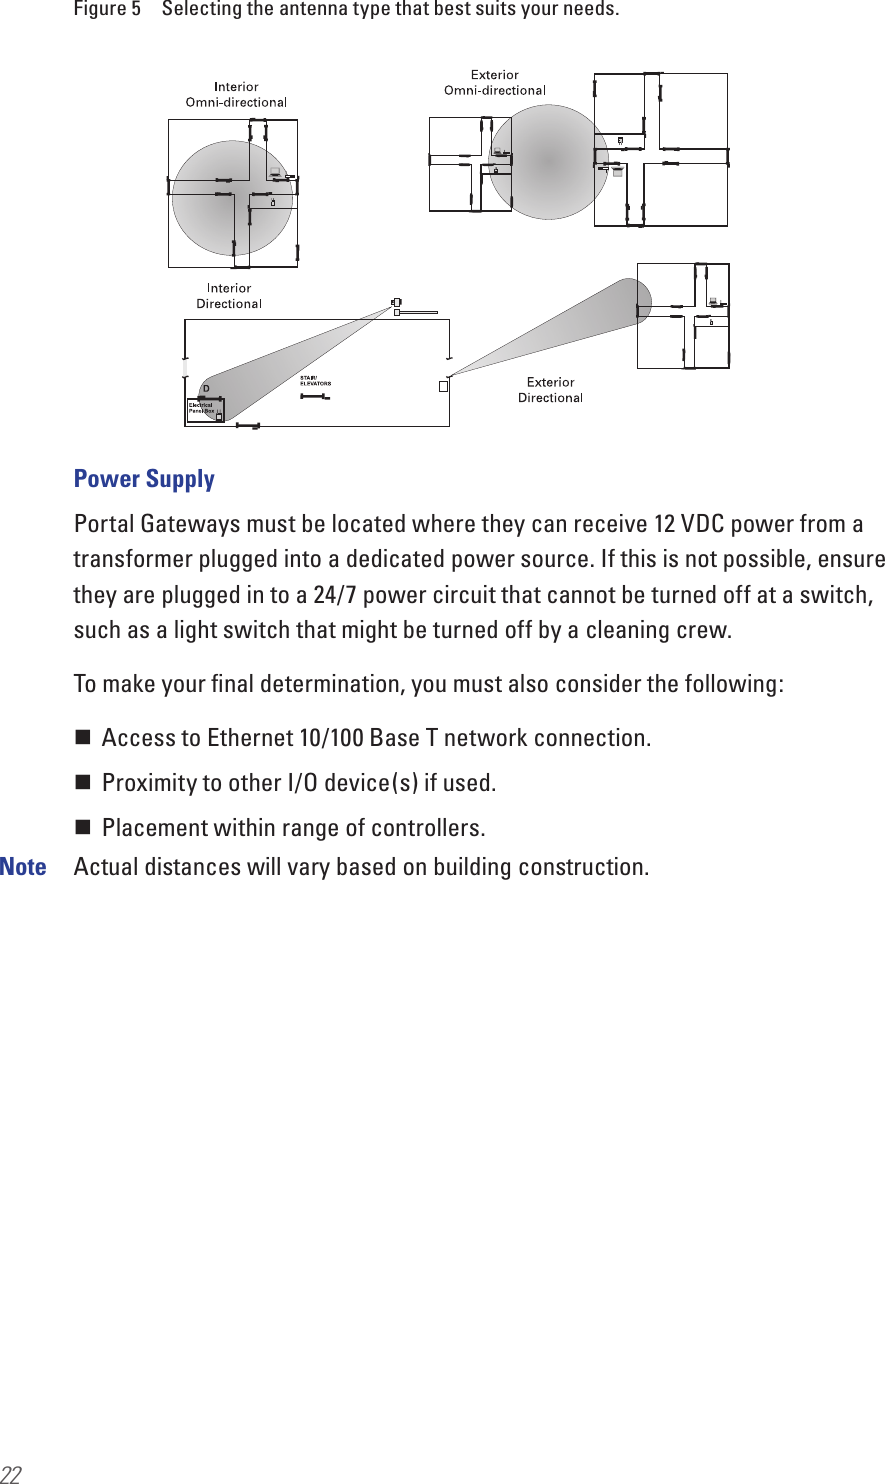 22Figure 5  Selecting the antenna type that best suits your needs.Power SupplyPortal Gateways must be located where they can receive 12 VDC power from a transformer plugged into a dedicated power source. If this is not possible, ensure they are plugged in to a 24/7 power circuit that cannot be turned off at a switch, such as a light switch that might be turned off by a cleaning crew.To make your ﬁnal determination, you must also consider the following: Access to Ethernet 10/100 Base T network connection. Proximity to other I/O device(s) if used. Placement within range of controllers.Note  Actual distances will vary based on building construction.